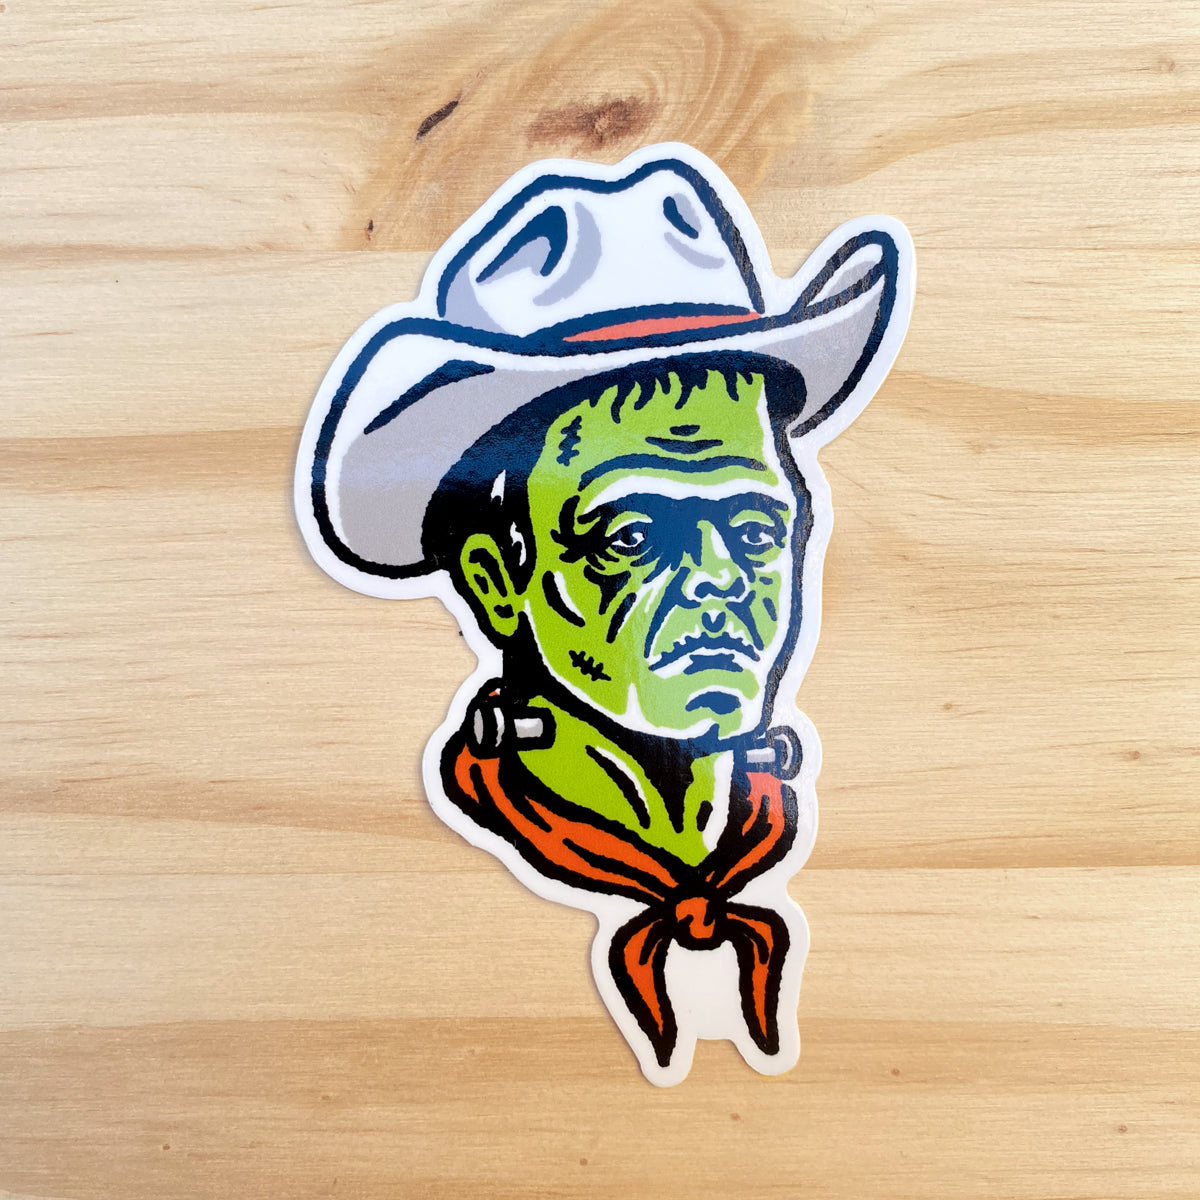 Cowboy Monsters Sticker Pack